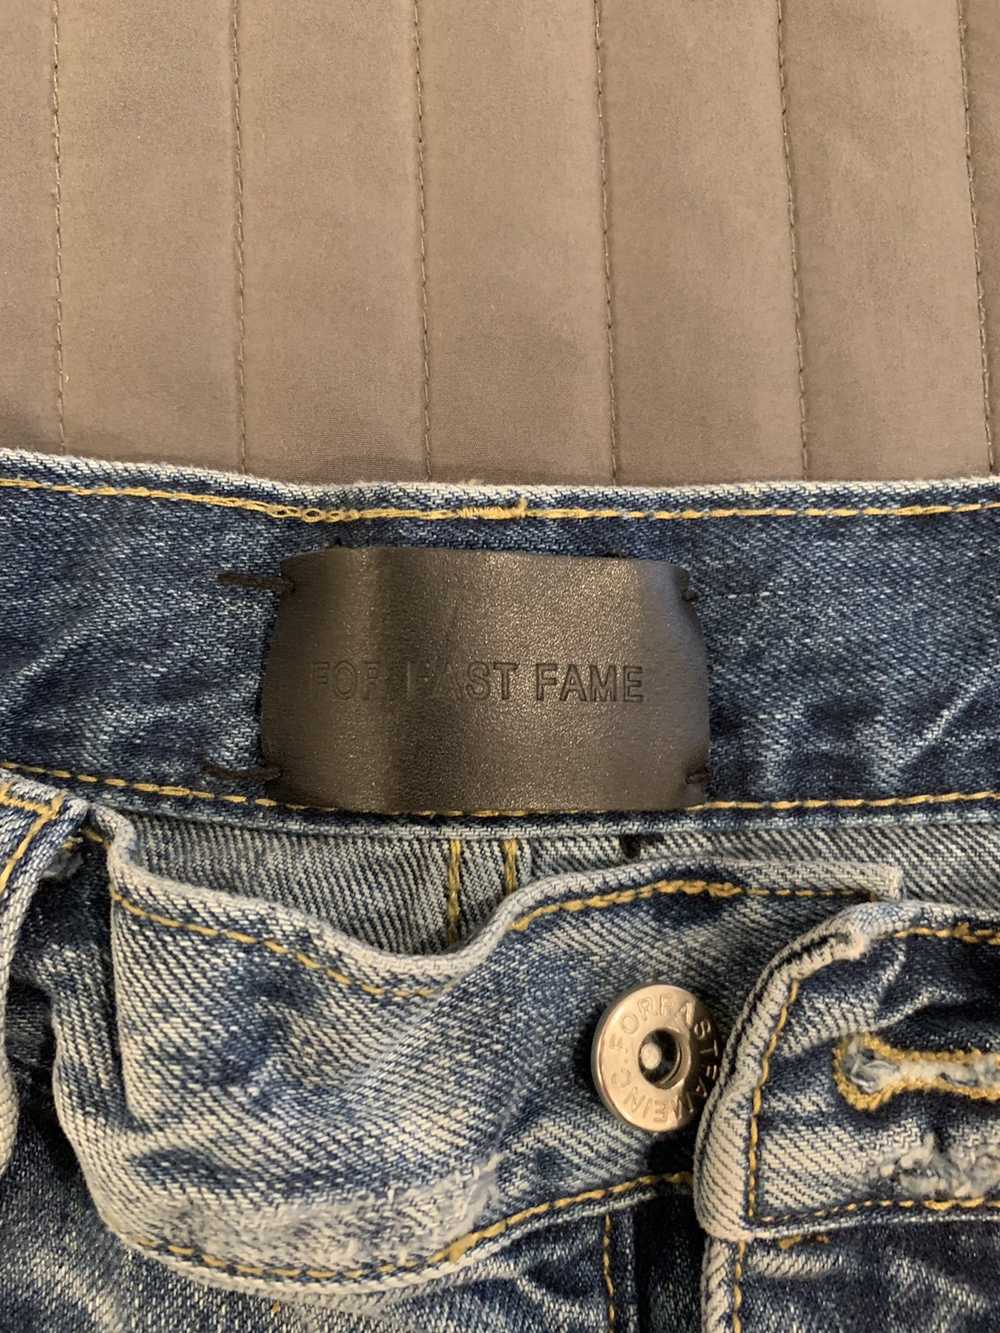 For Fast Fame Inc. For fast fame fear of god pain… - image 3